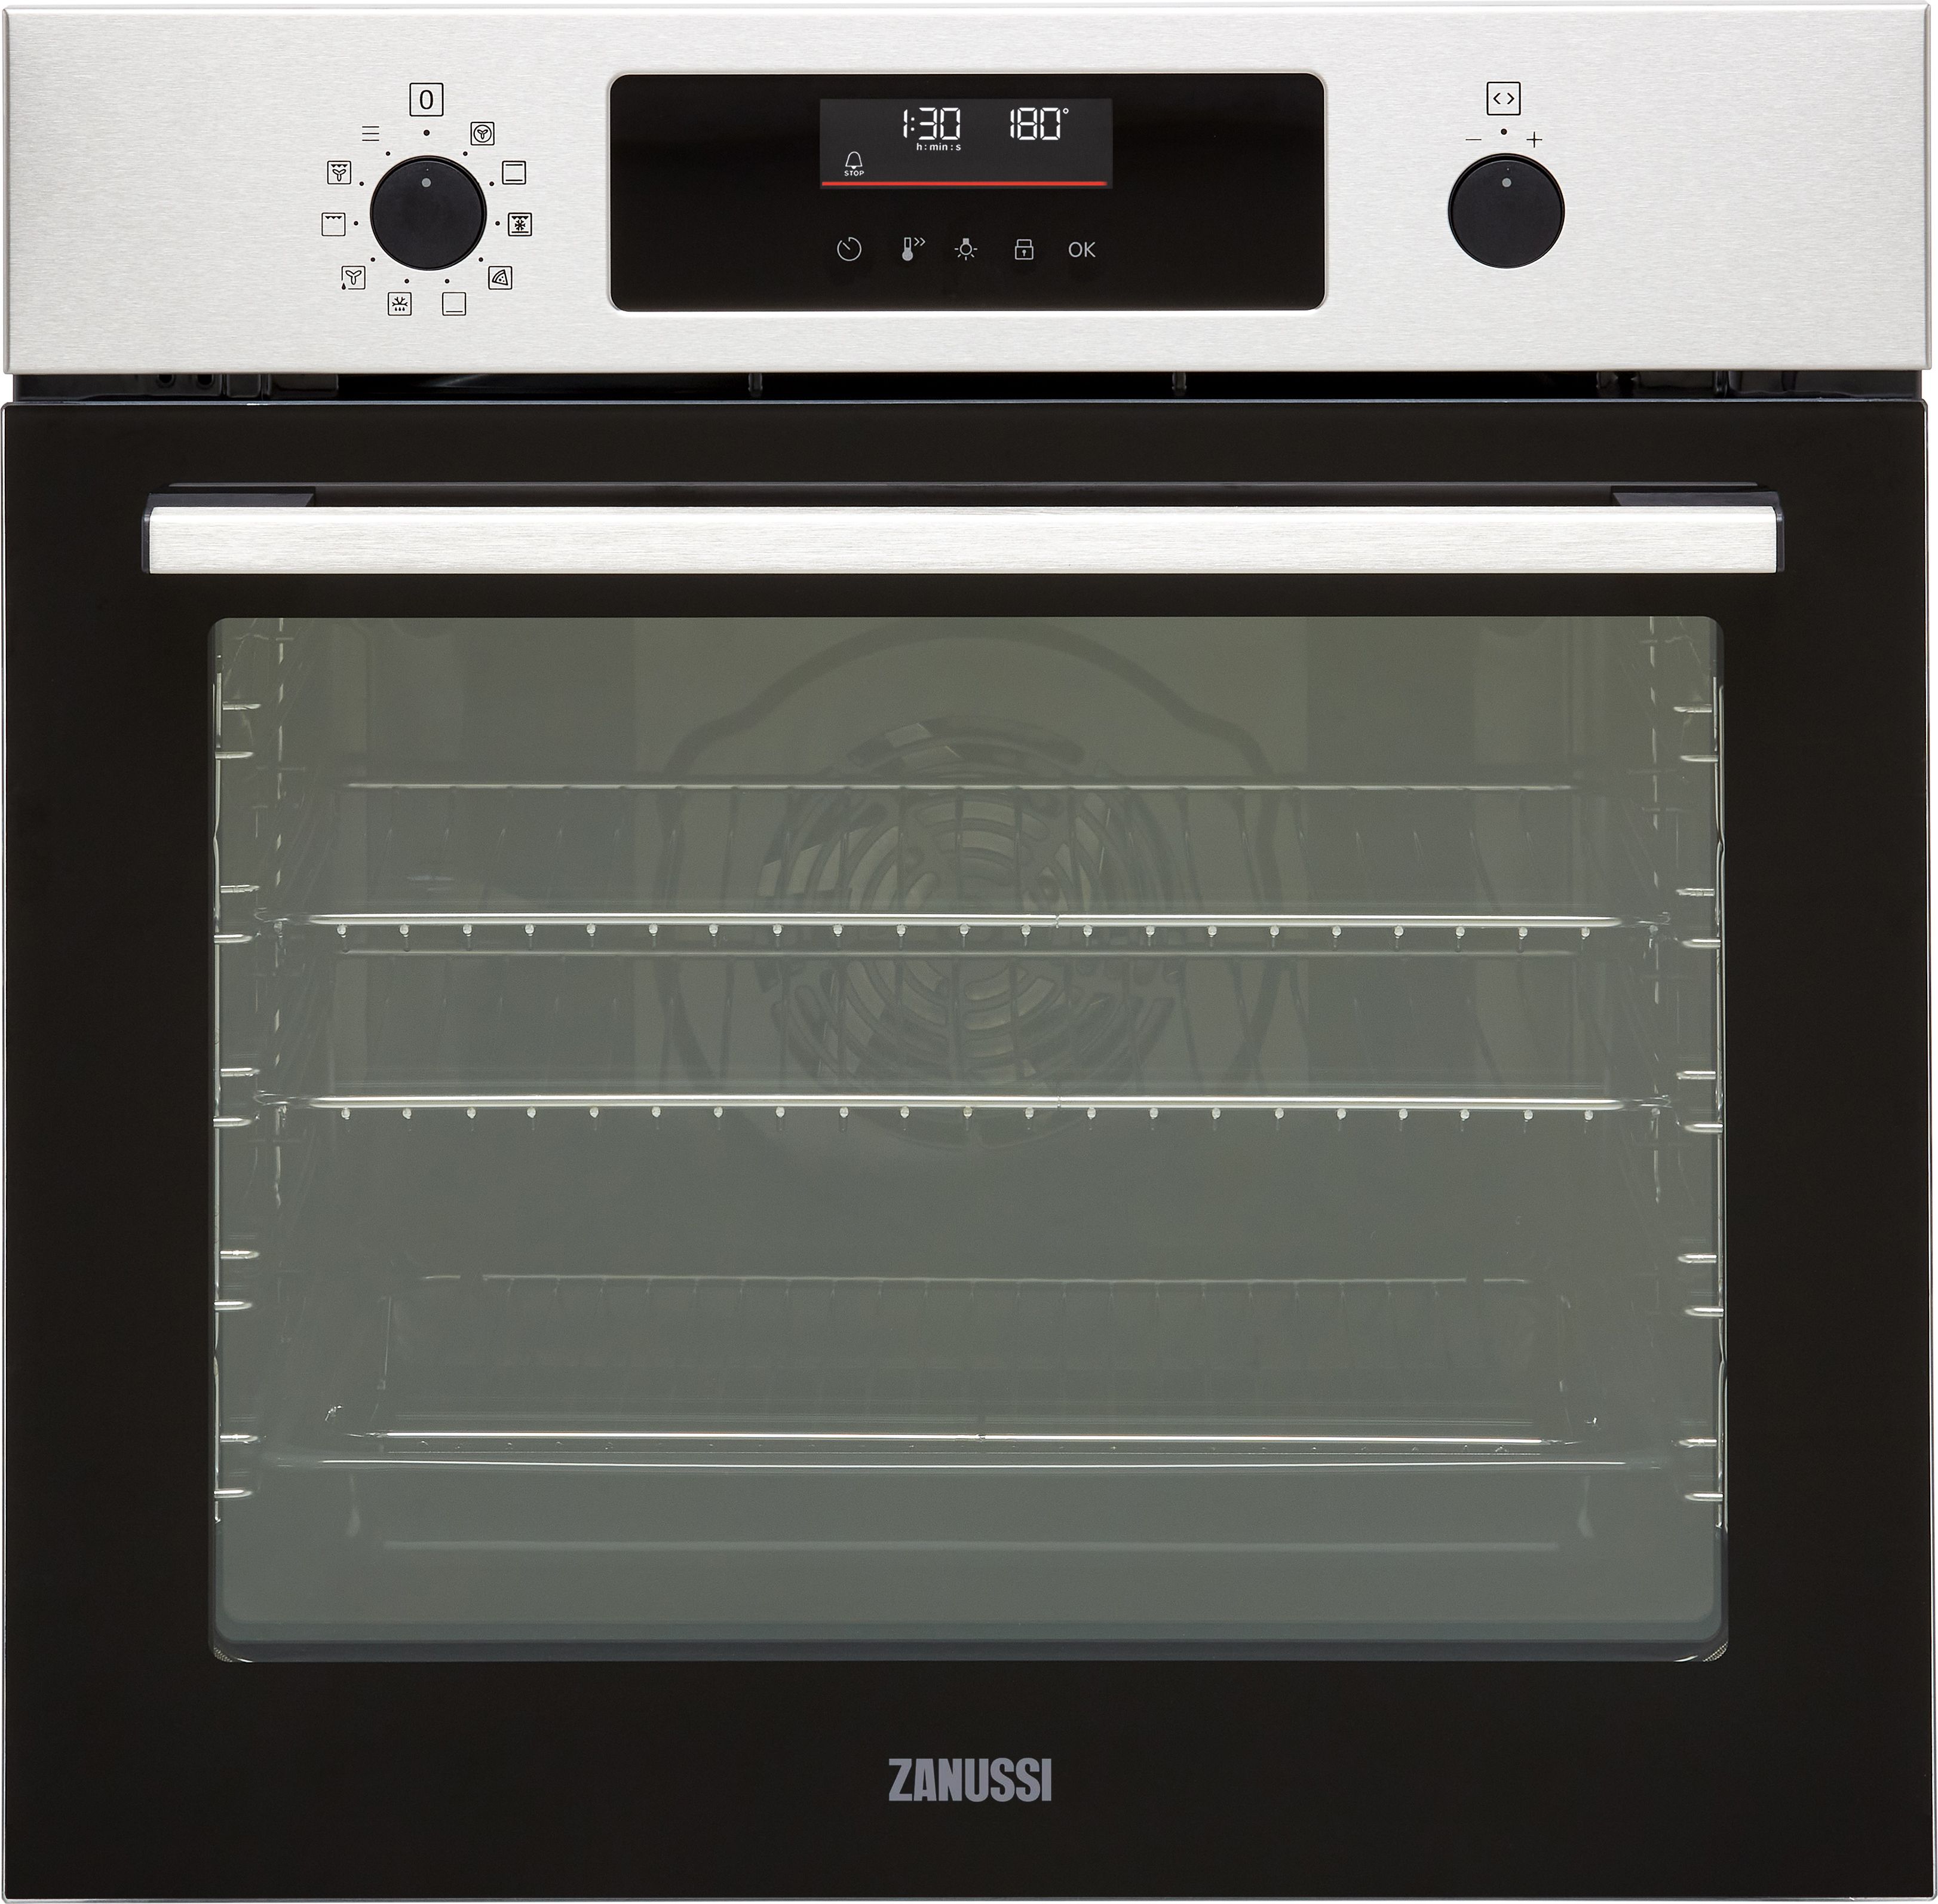 Zanussi ZOPNX6XN Built In Electric Single Oven and Pyrolytic Cleaning - Stainless Steel / Black - A+ Rated, Stainless Steel